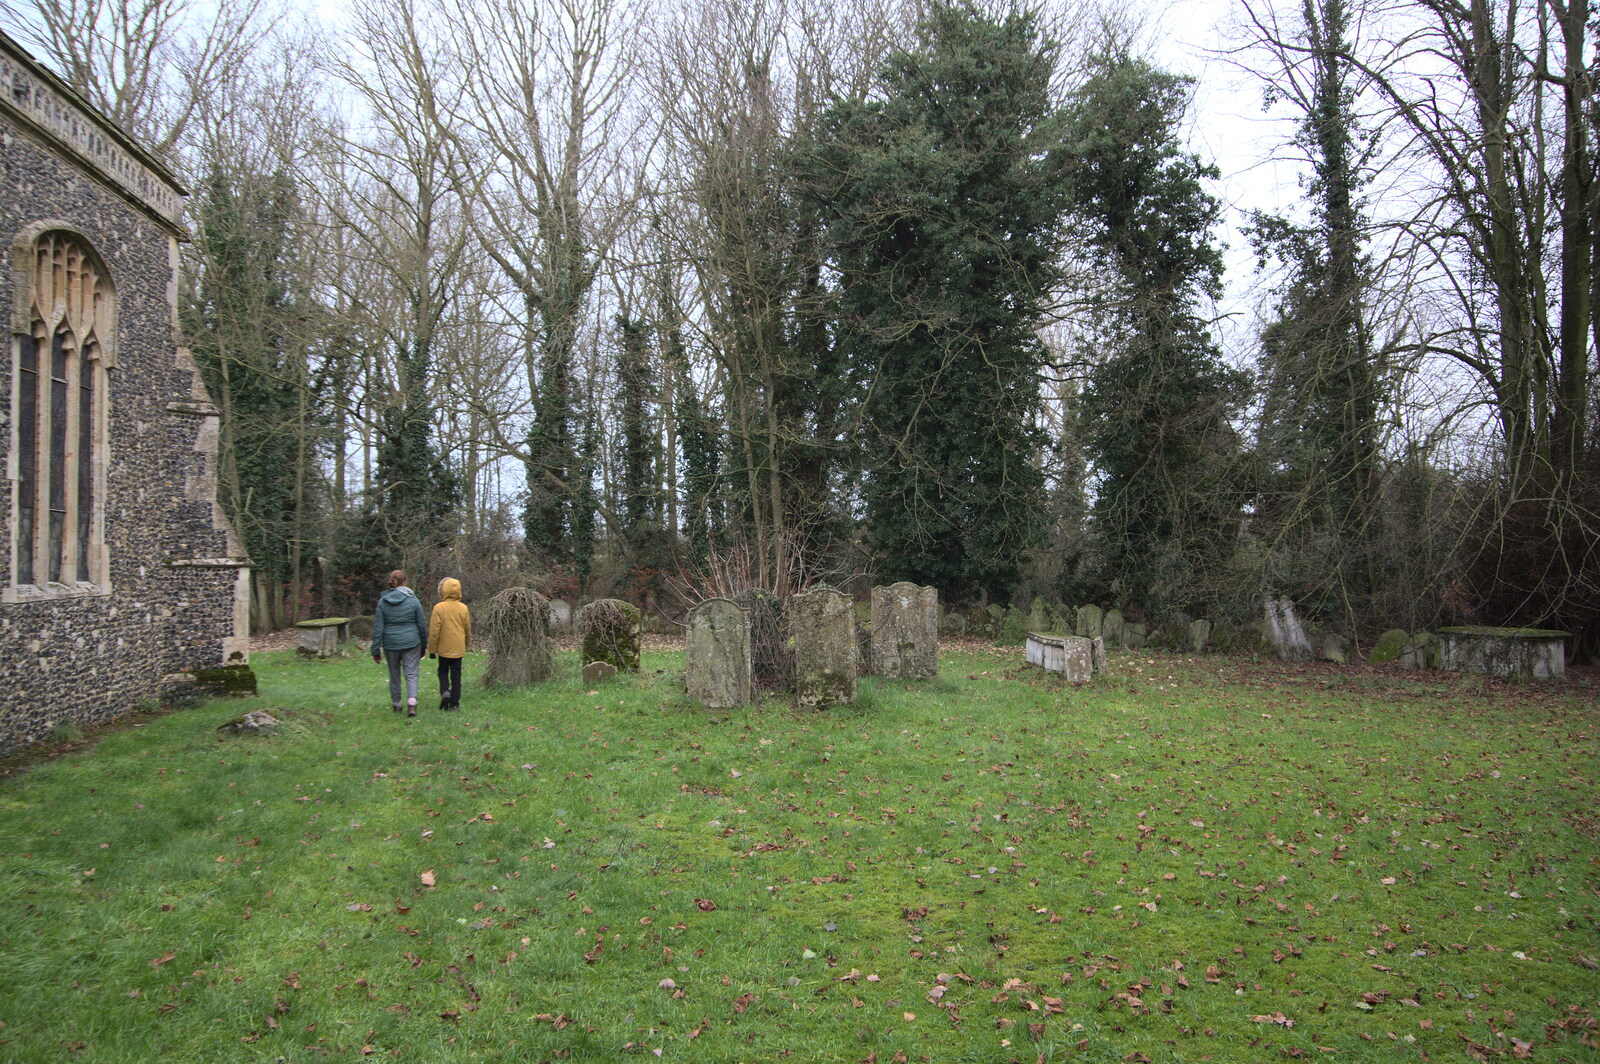 Winter Walks around Brome and Hoxne, Suffolk - 2nd January 2023: Isobel and Harry in the churchyard